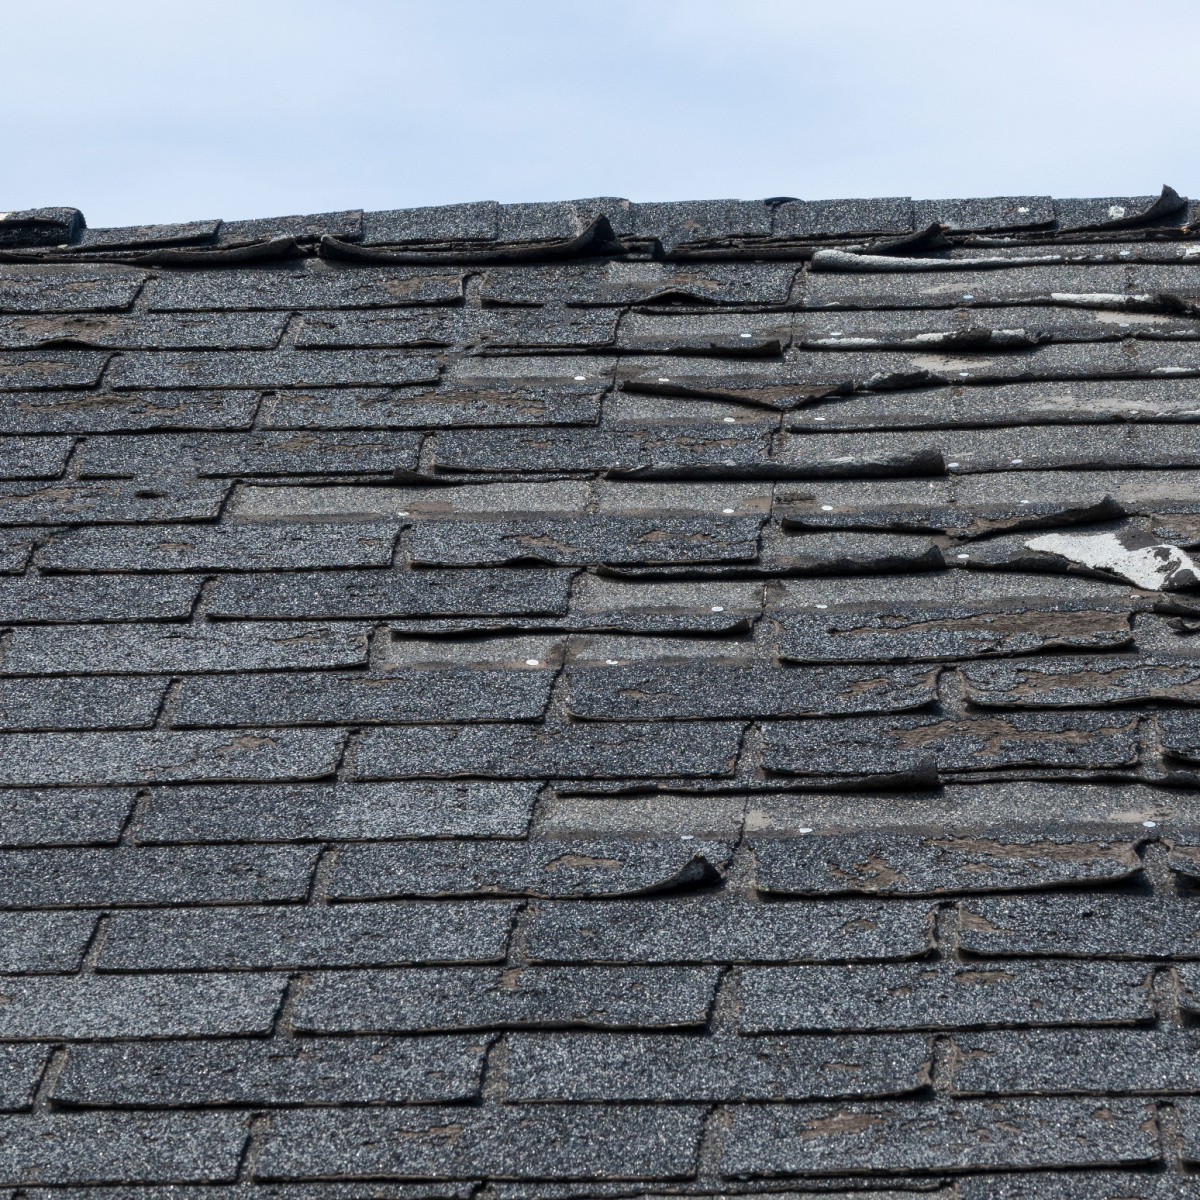 A damaged roof